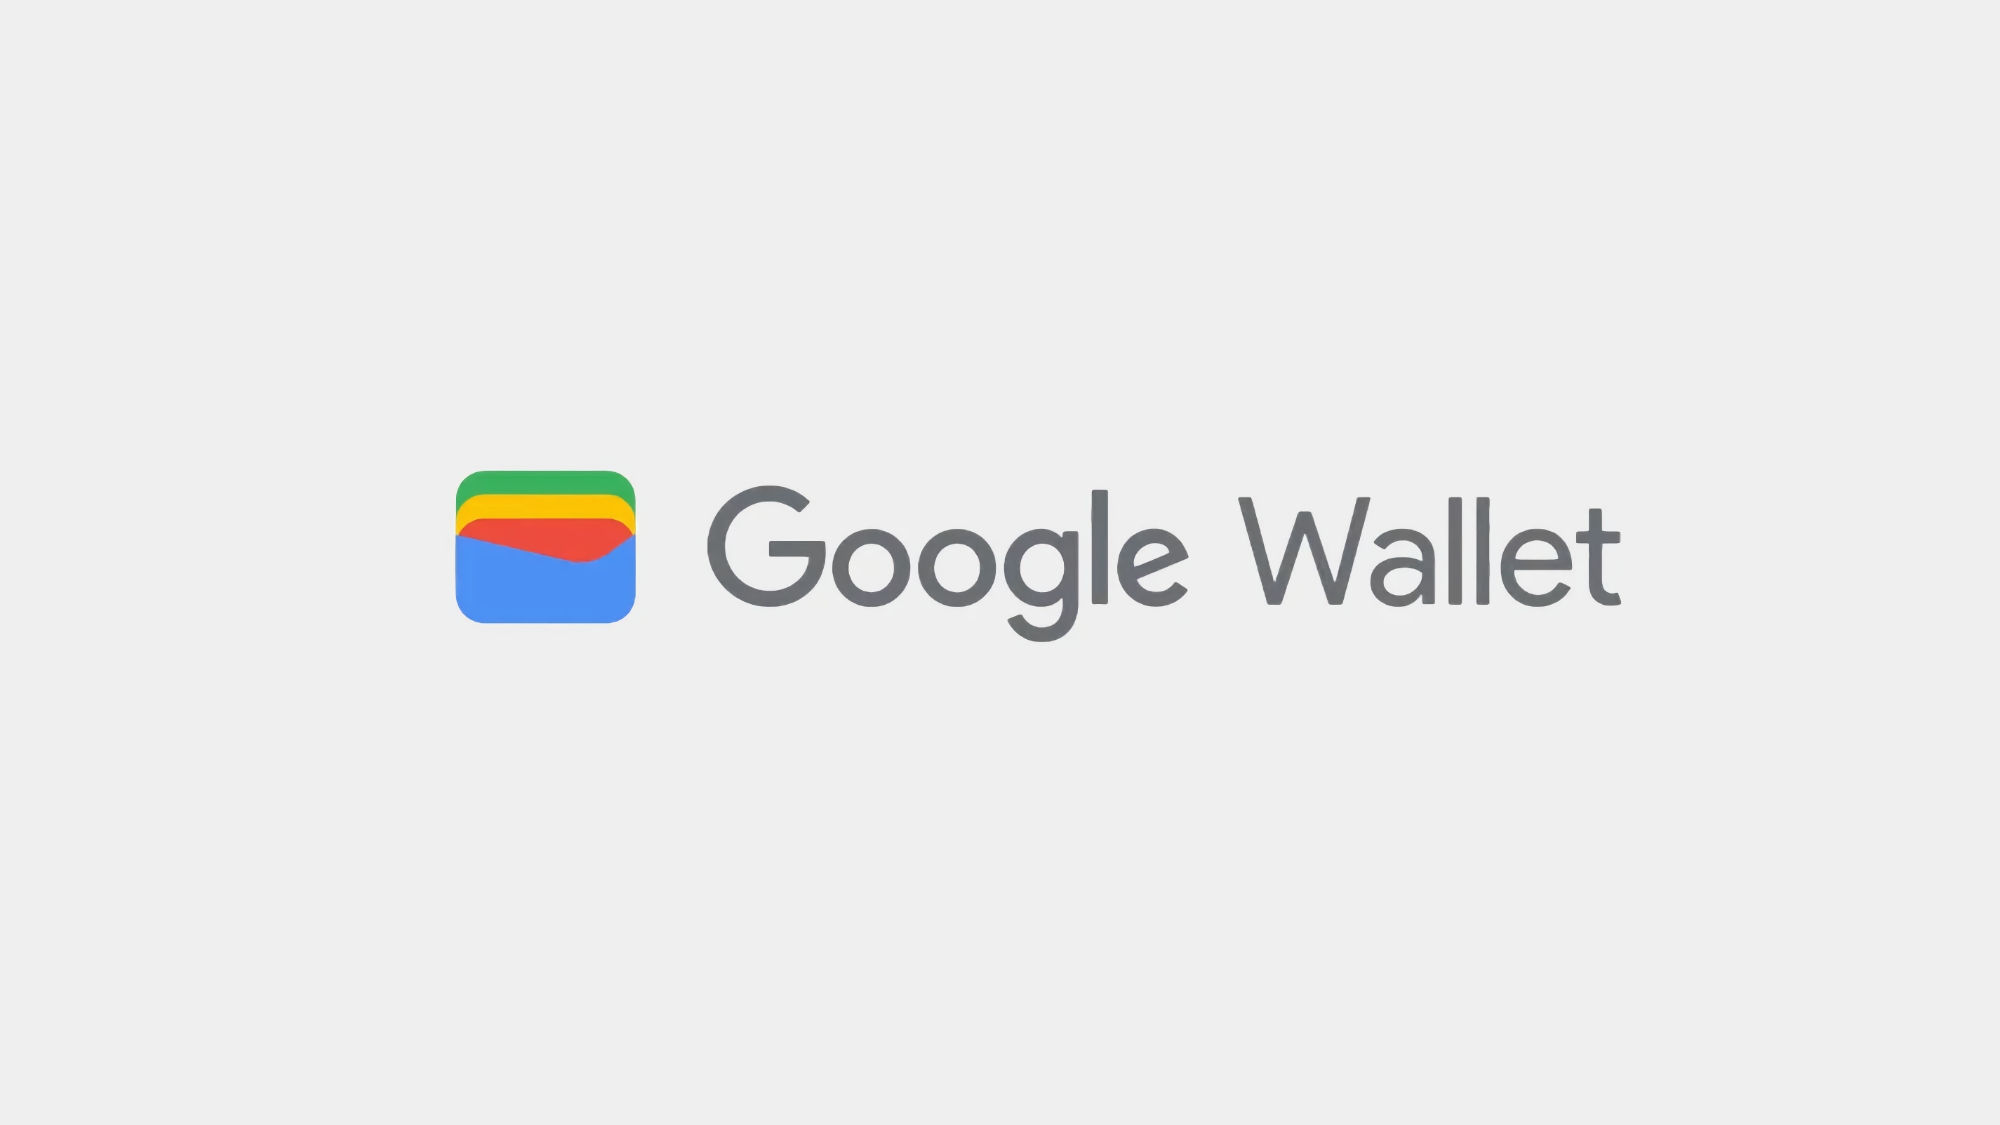 Google Wallet: application for storing bank cards, vaccination certificates, tickets and travel cards